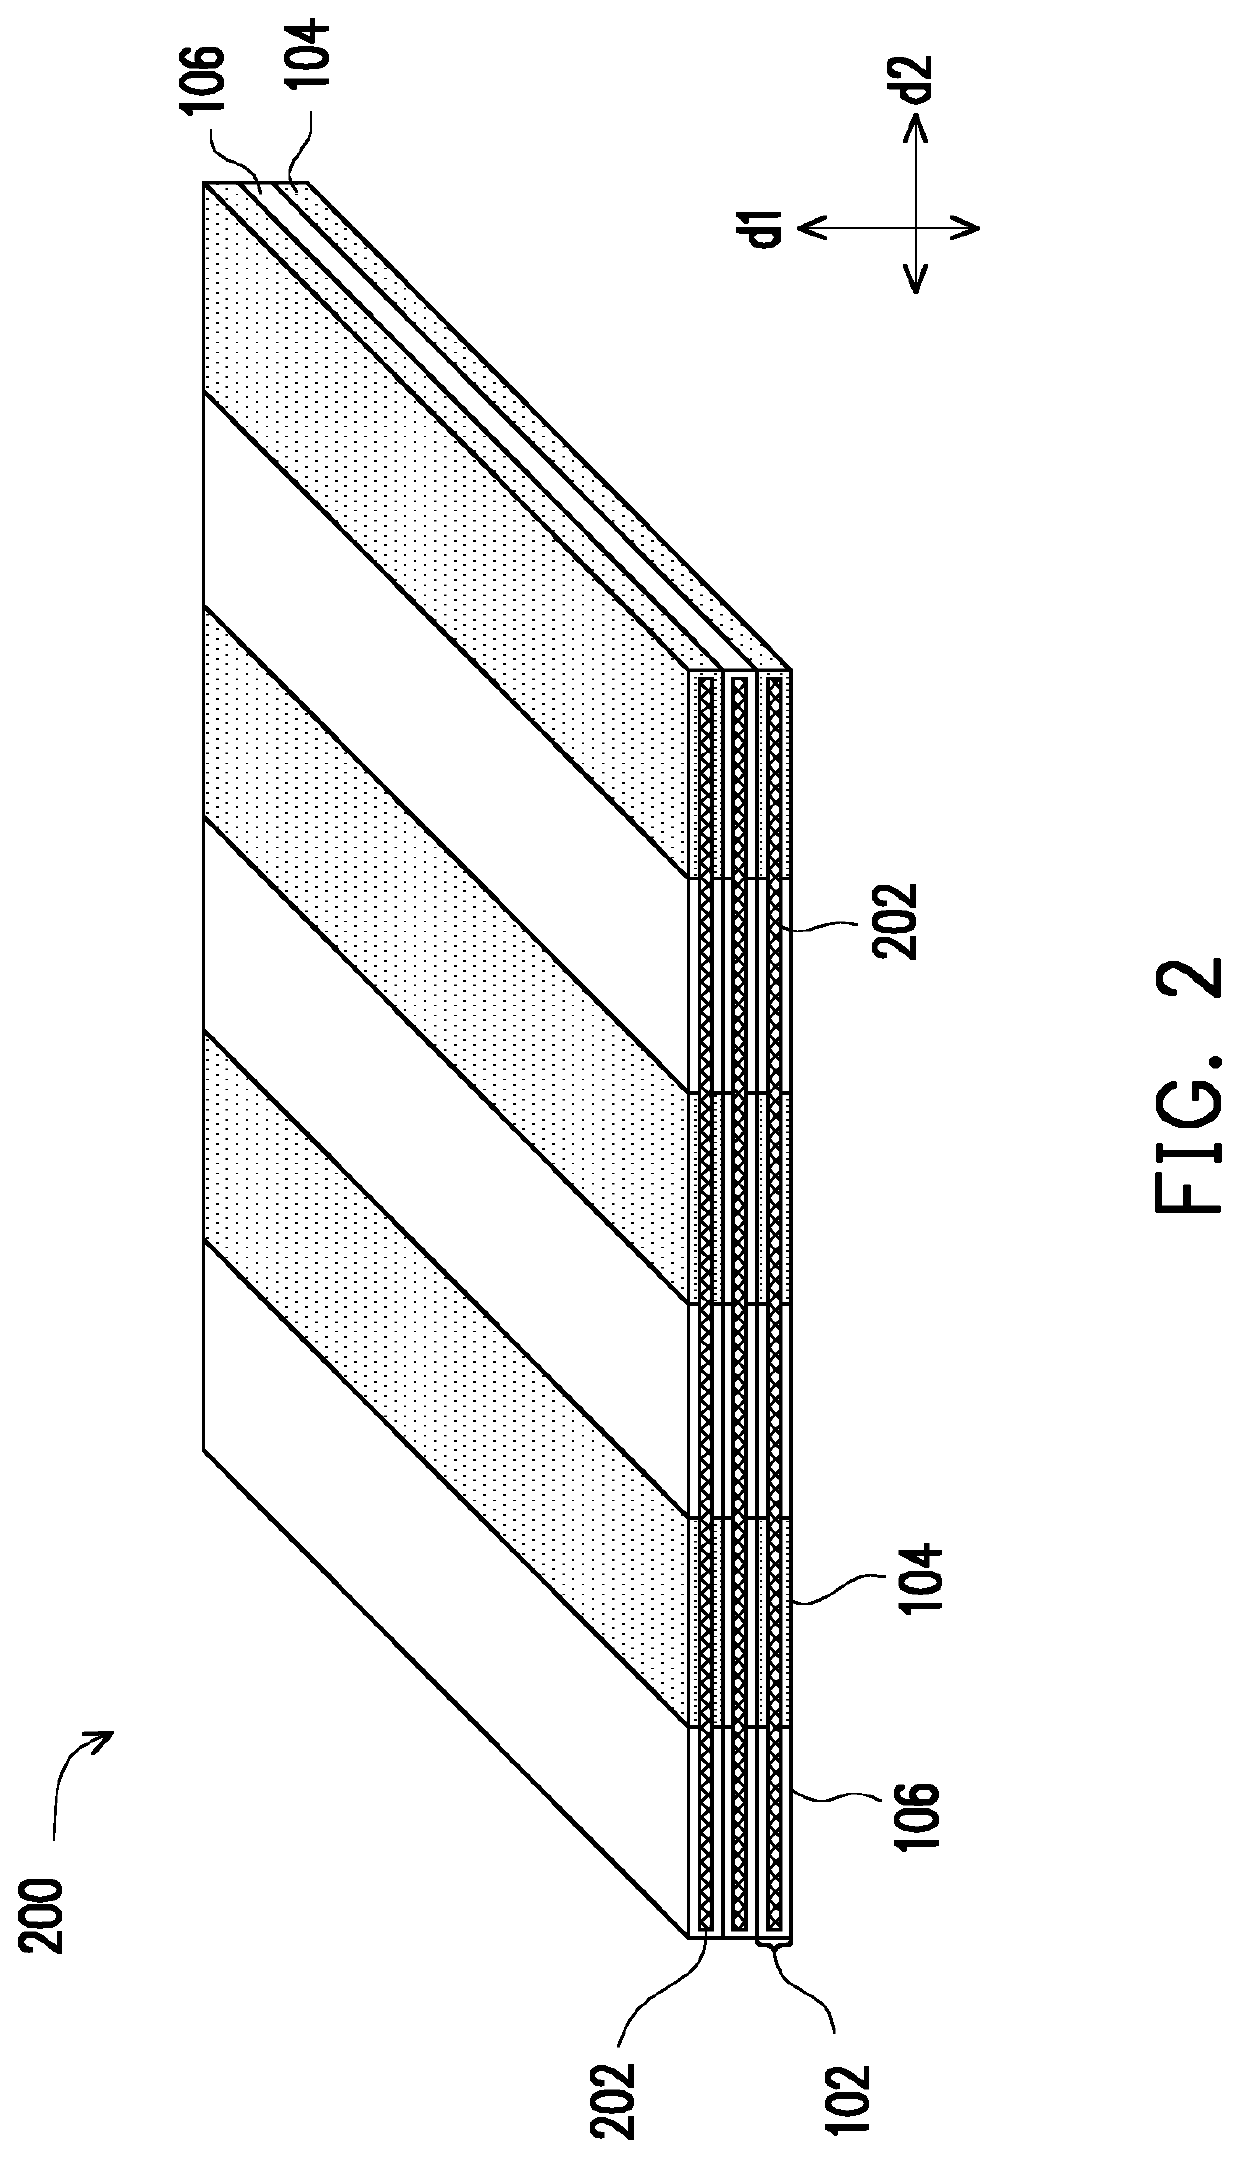 Capacitive stealth composite structure